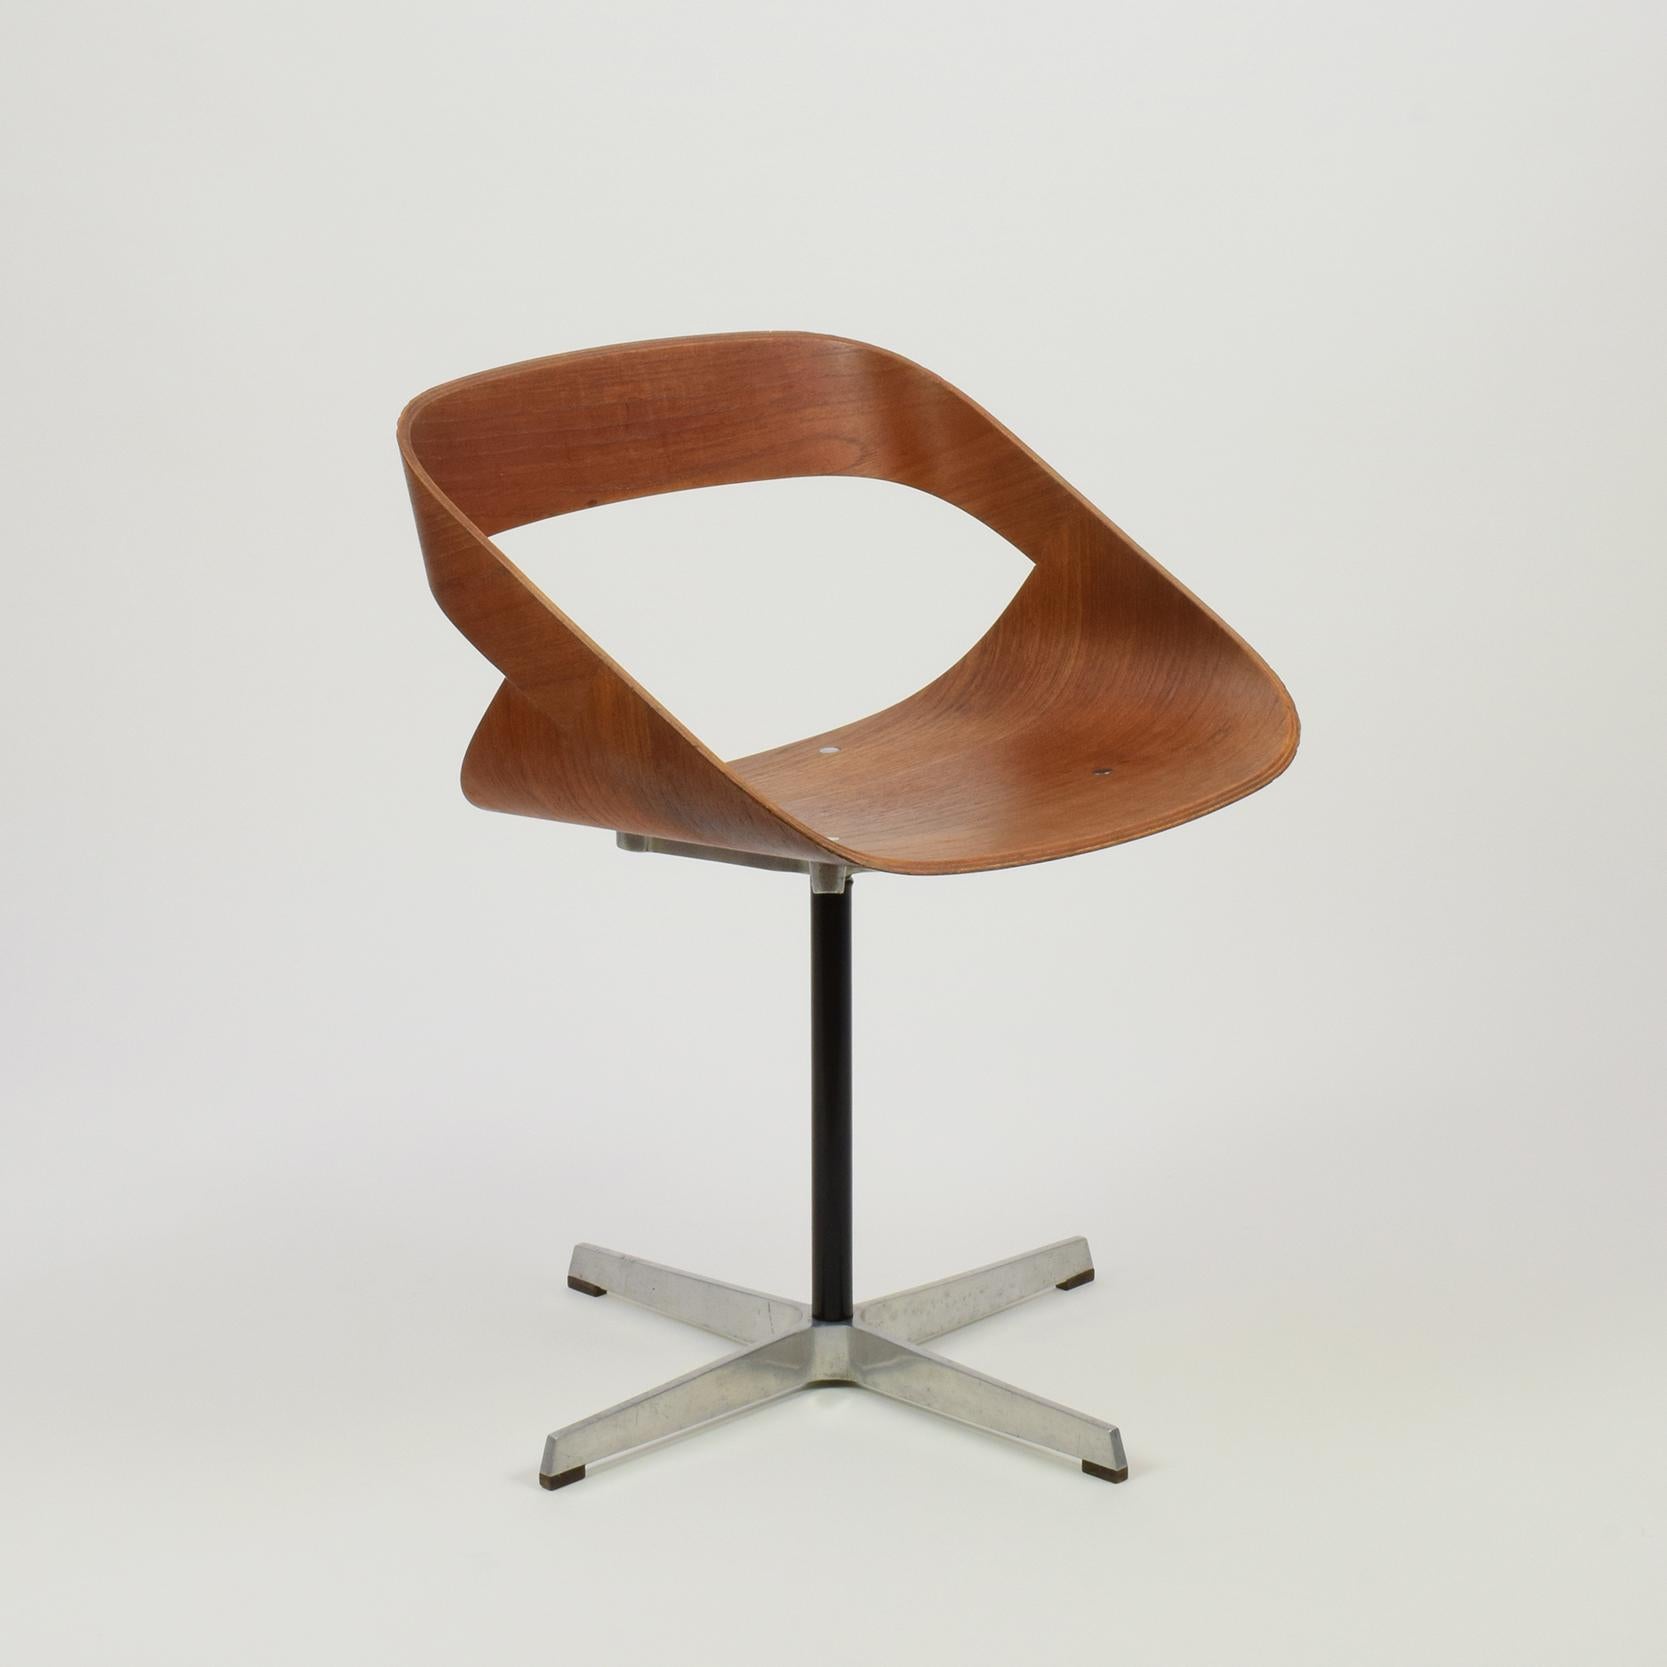 British Geoffrey Harcourt, Chair 130, 'RCA' Chair, Designed 1960, Produced by Artifort For Sale